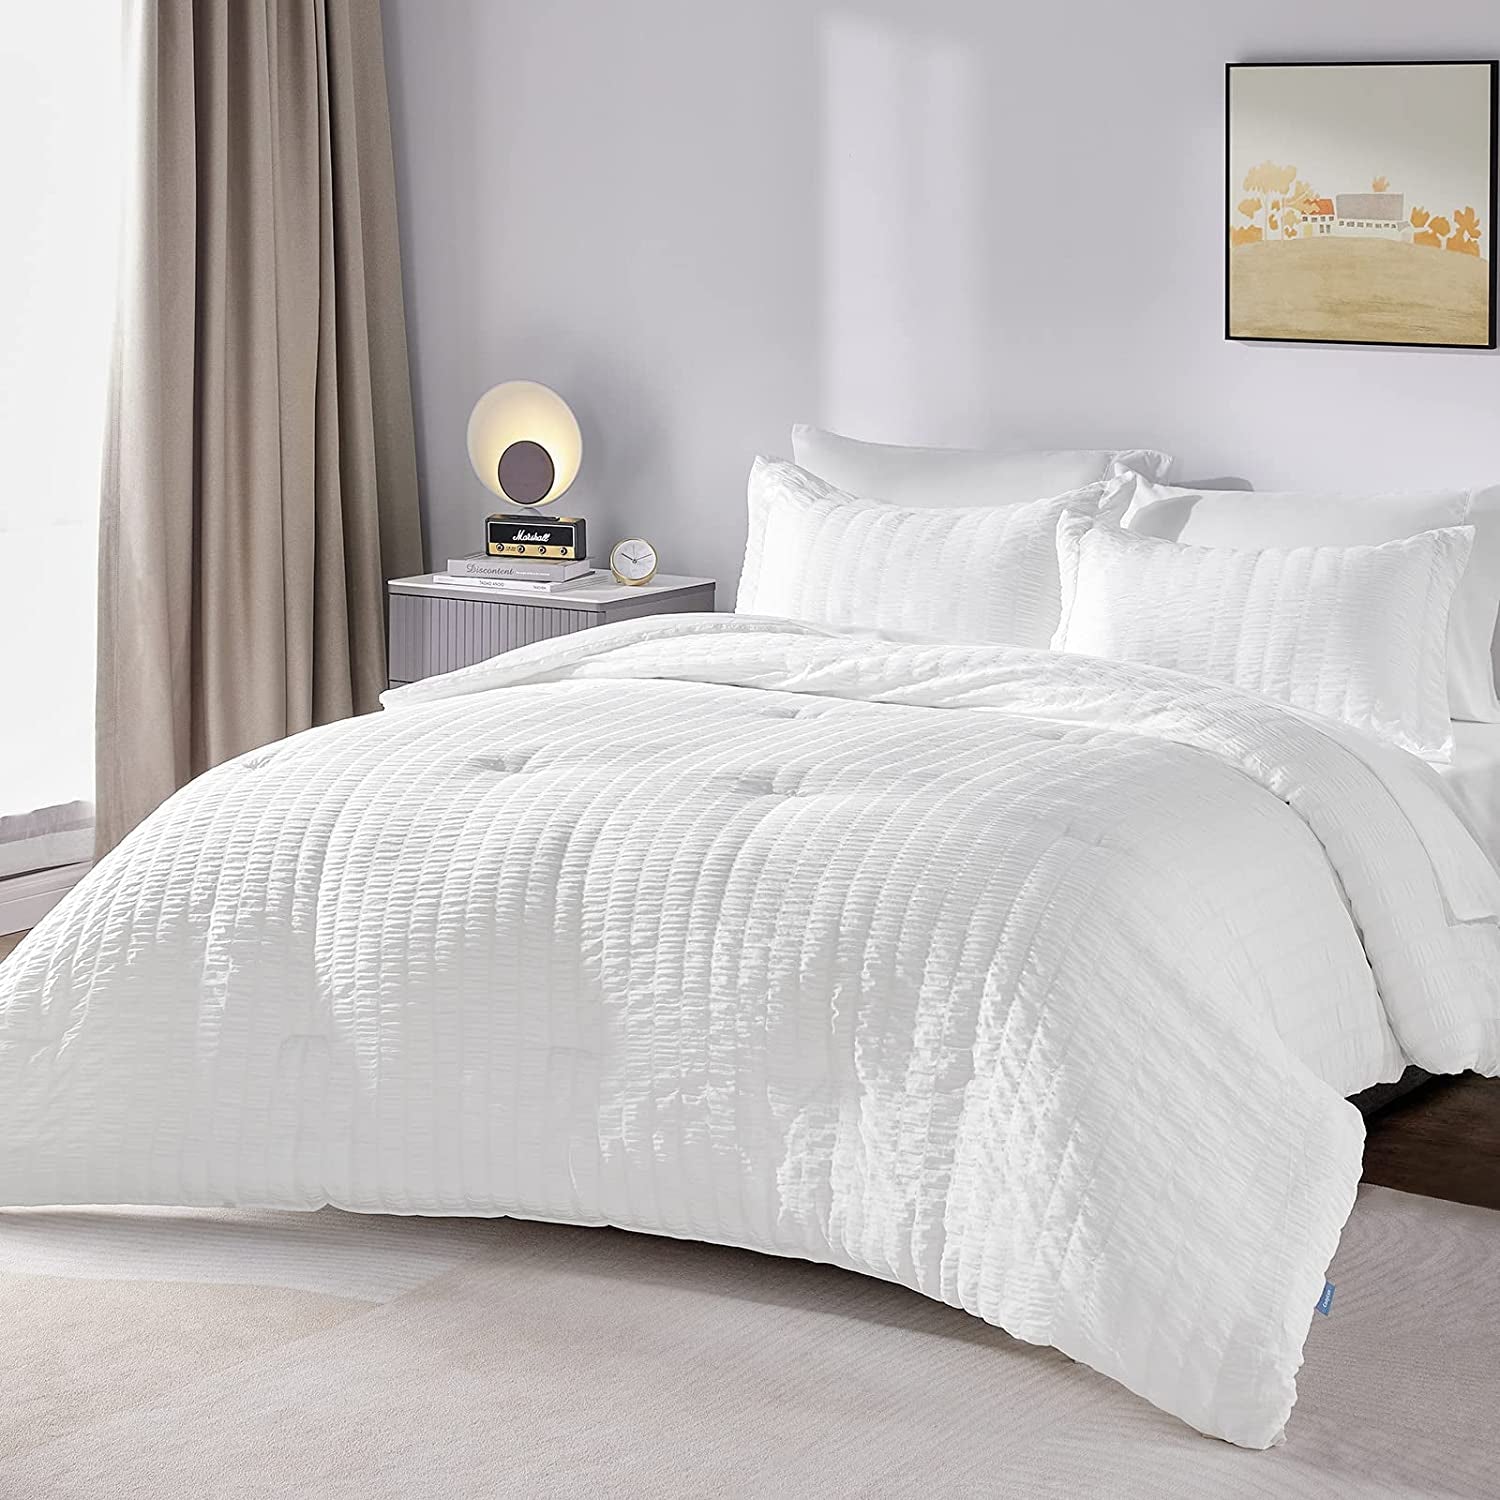 Queen Bed in a Bag White Seersucker Comforter Set with Sheets 7-Pieces All Season Bedding Sets with Comforter, Pillow Sham, Flat Sheet, Fitted Sheet and Pillowcase